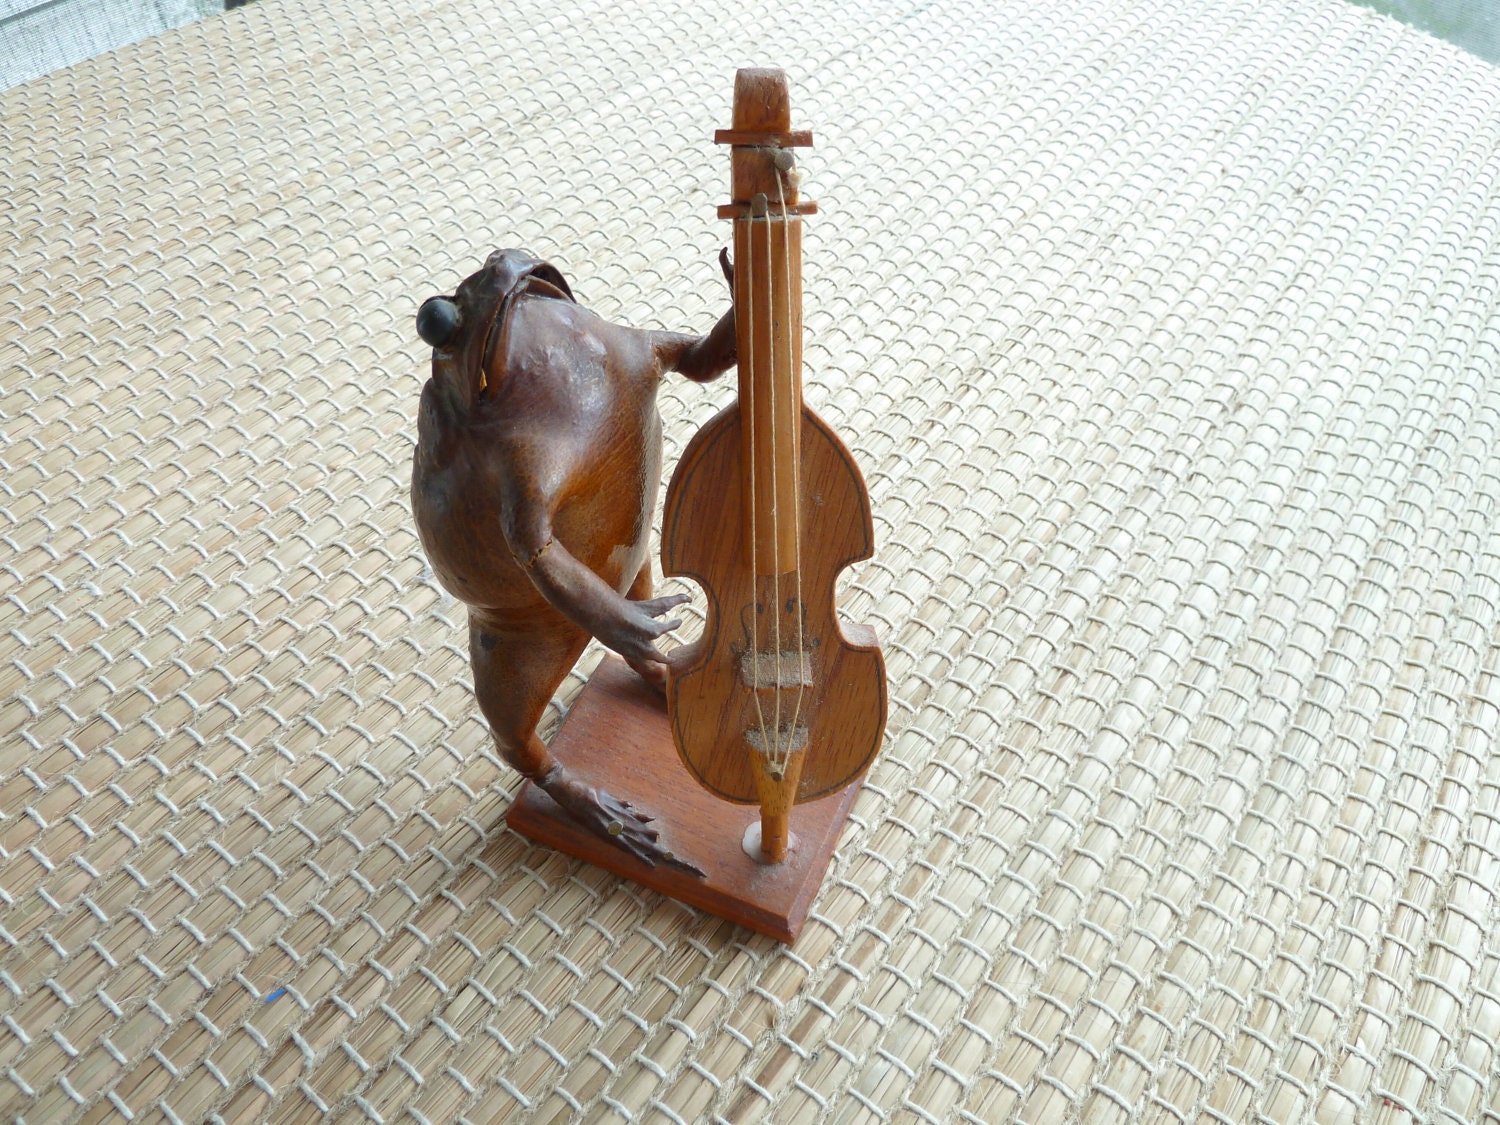 Stuffed Taxidermy frog from Mexico playing instrument, upright bass.